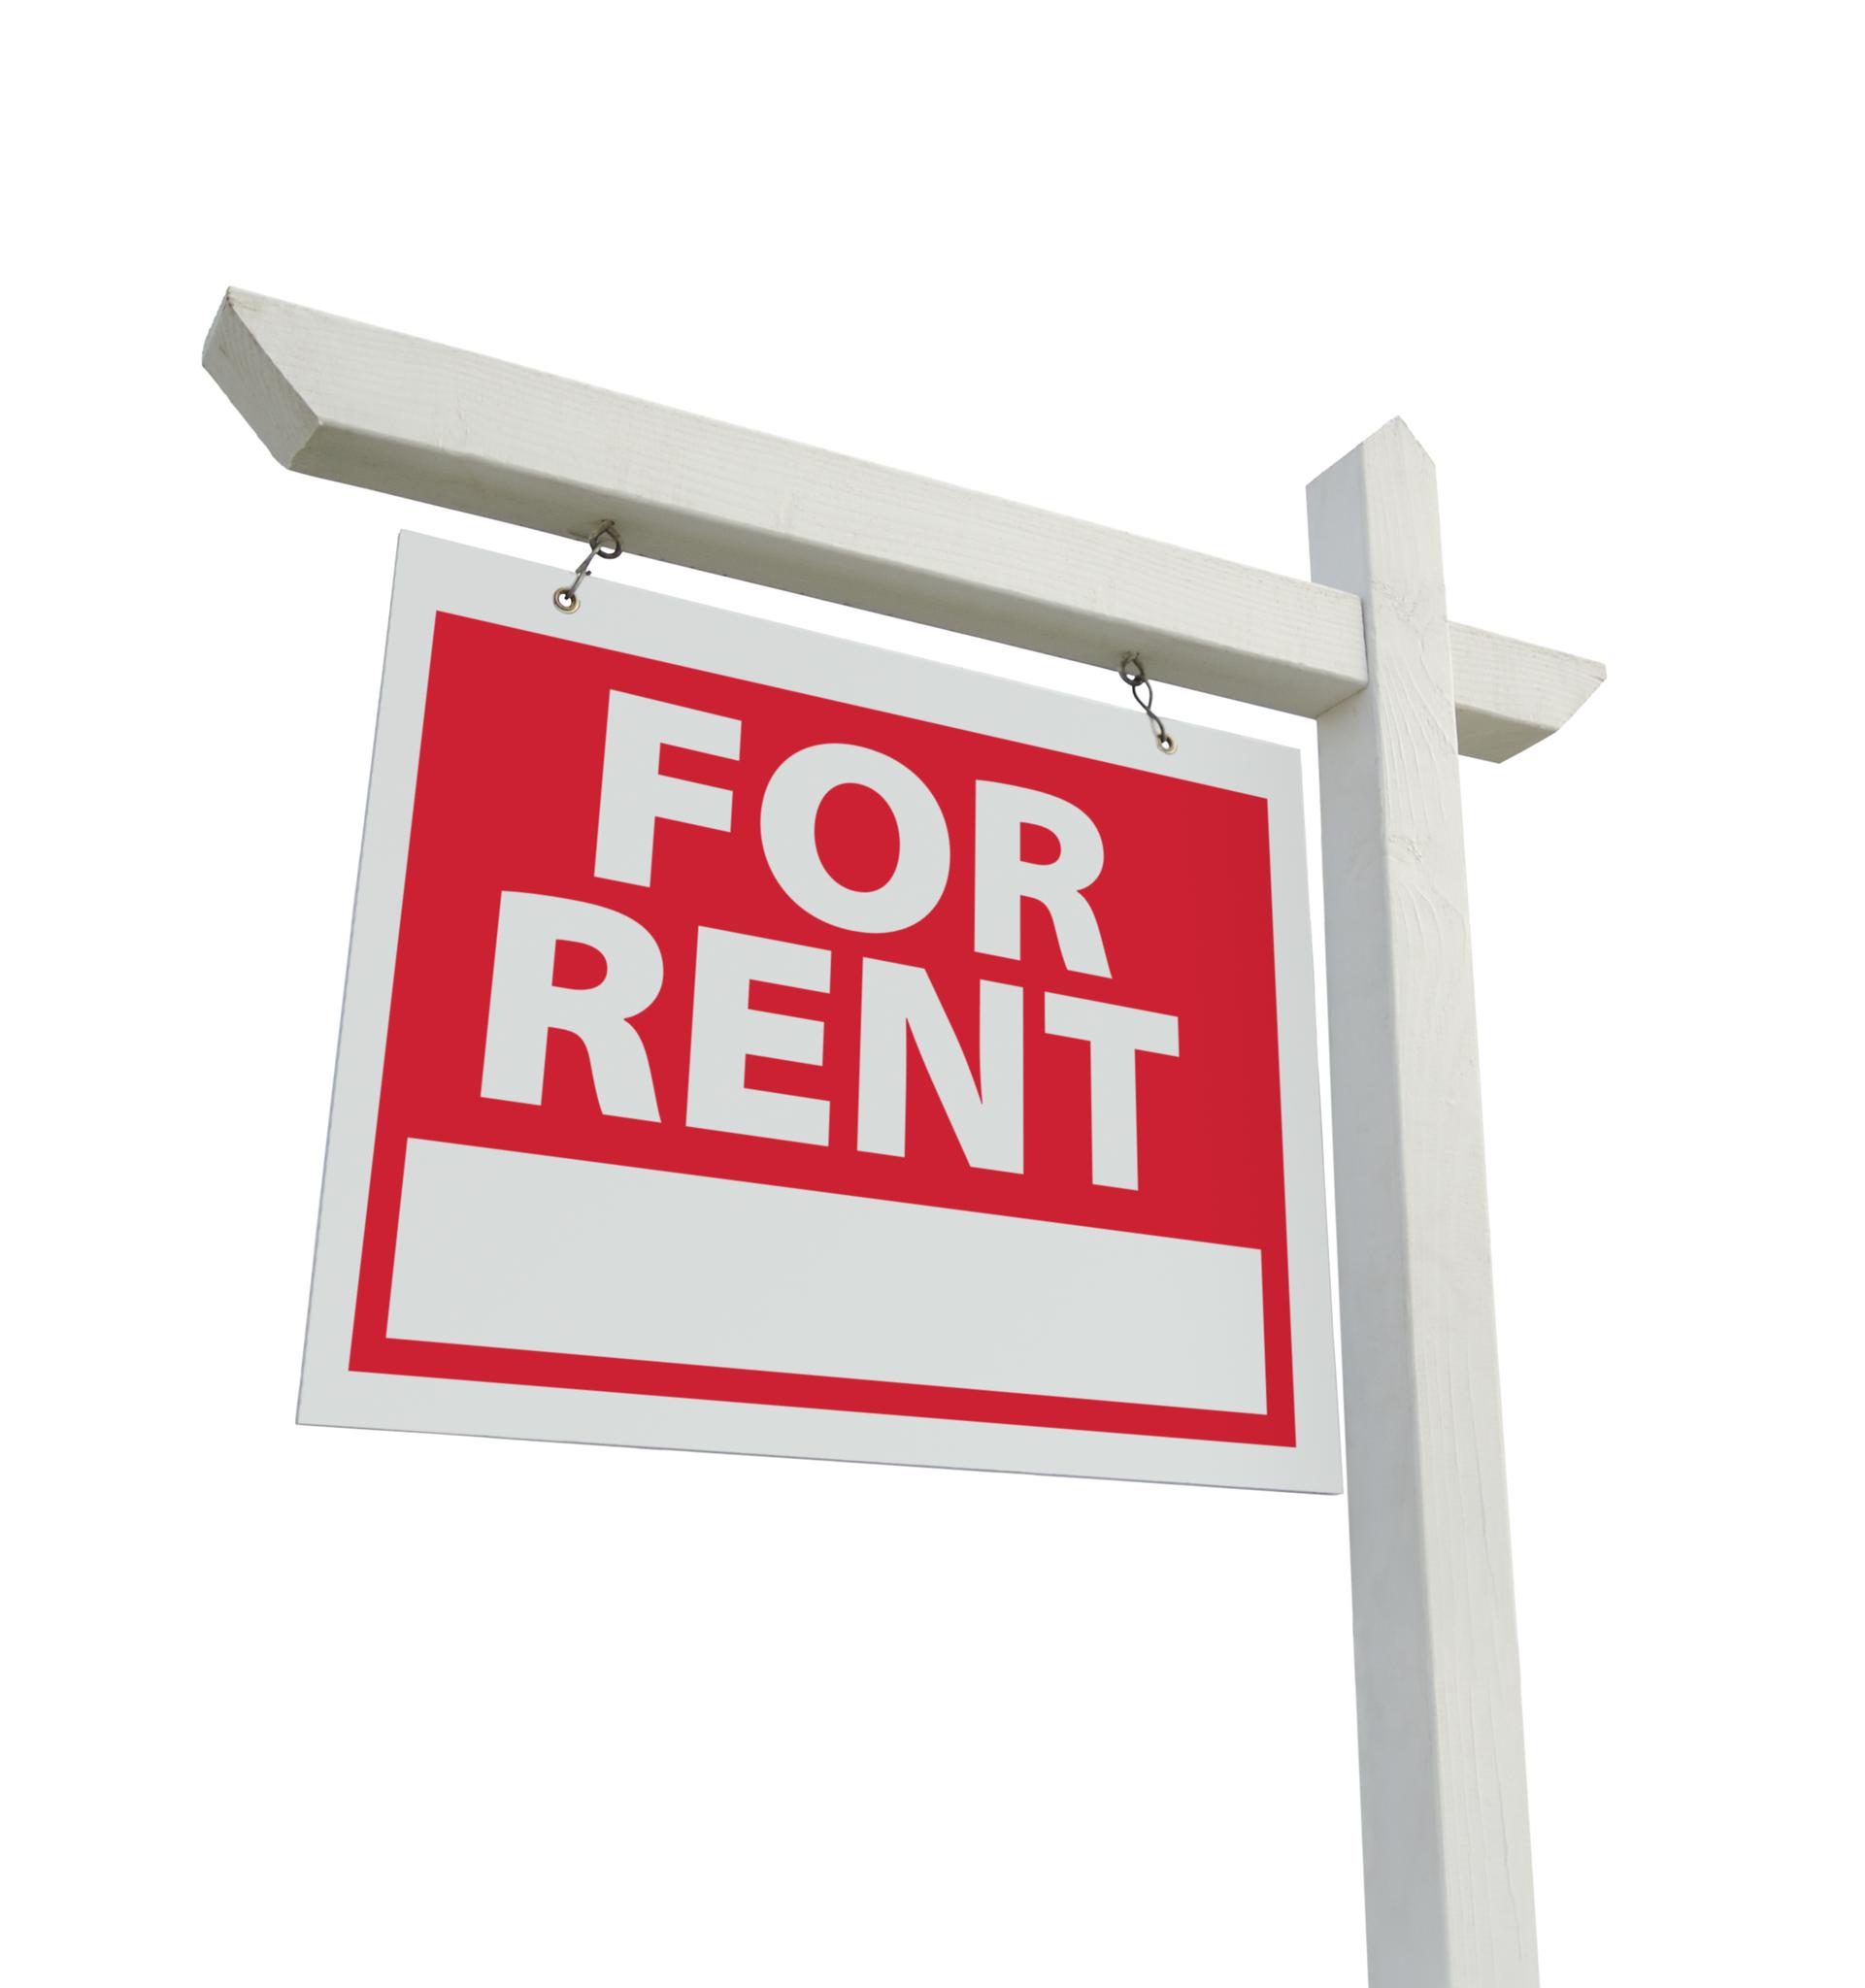 For Rent Real Estate Sign Isolated On A White Background